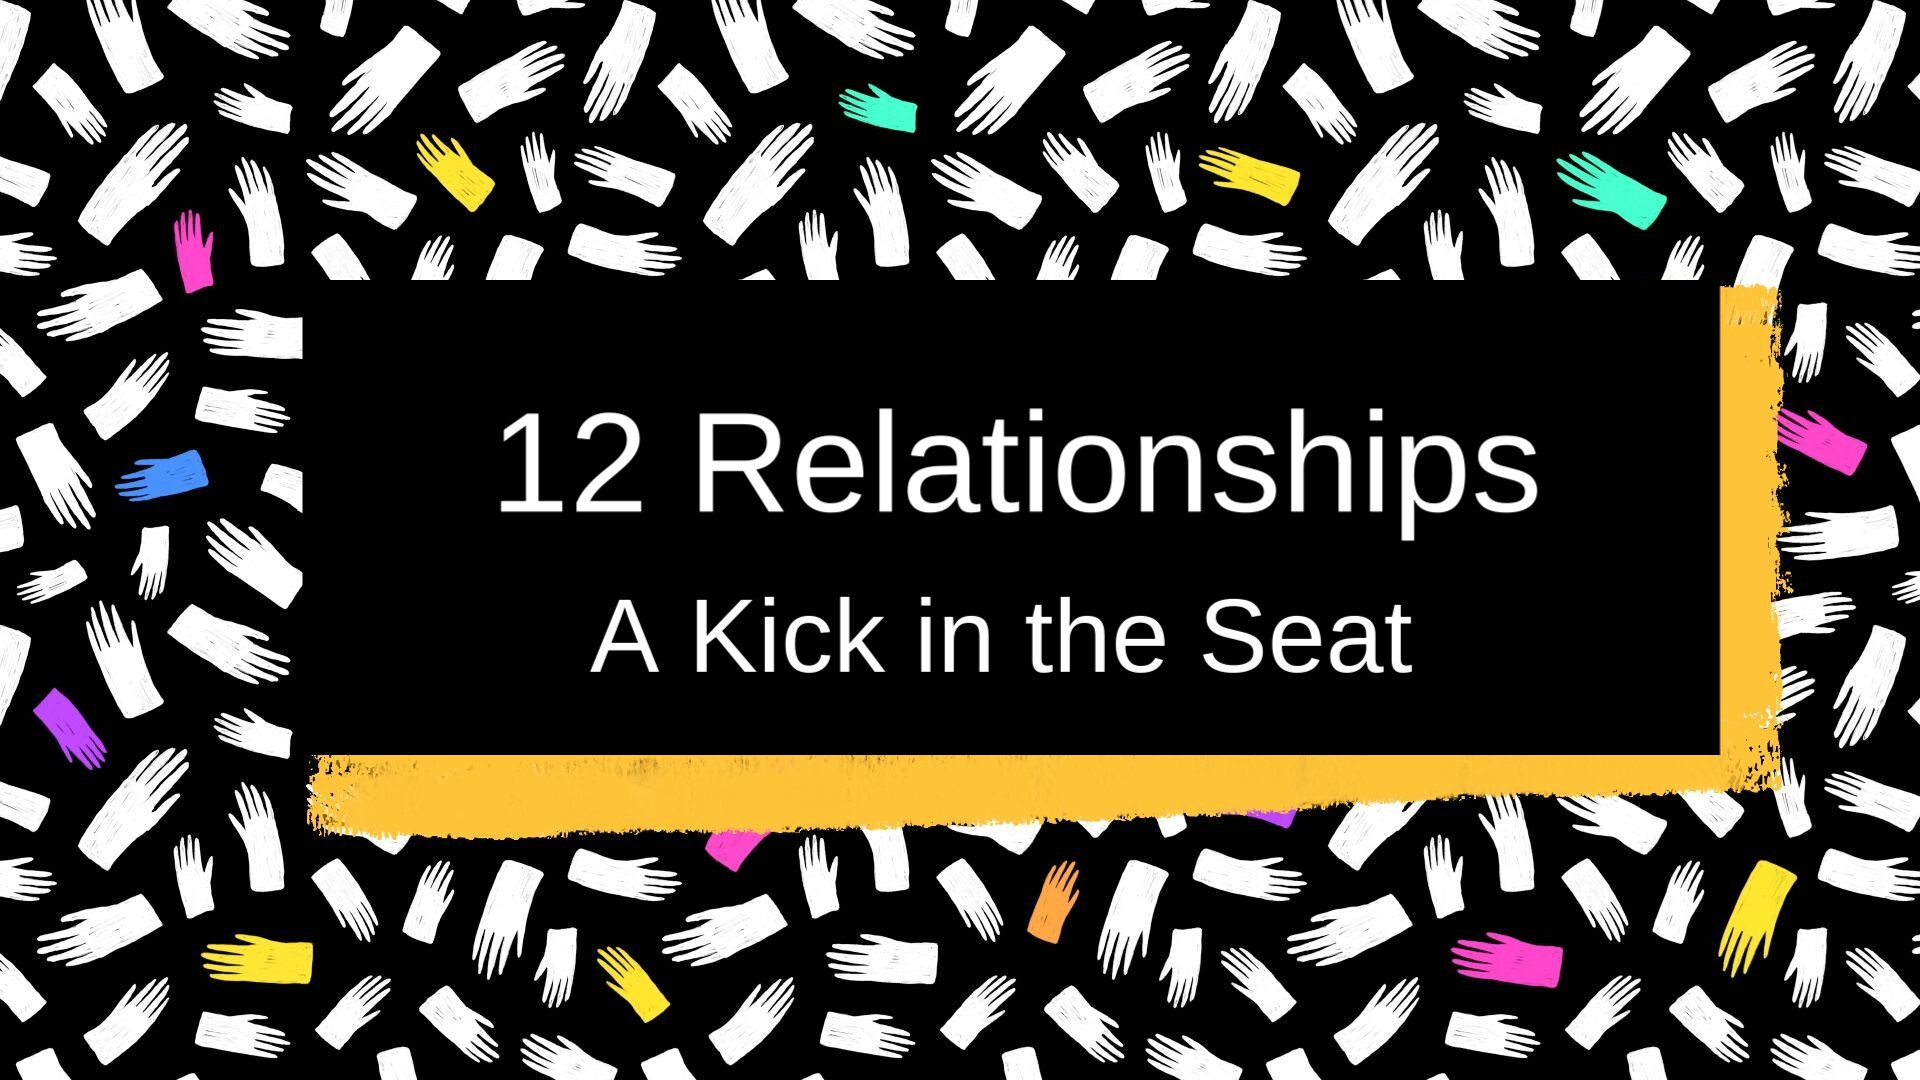 12 Relationships: A Kick in the Seat